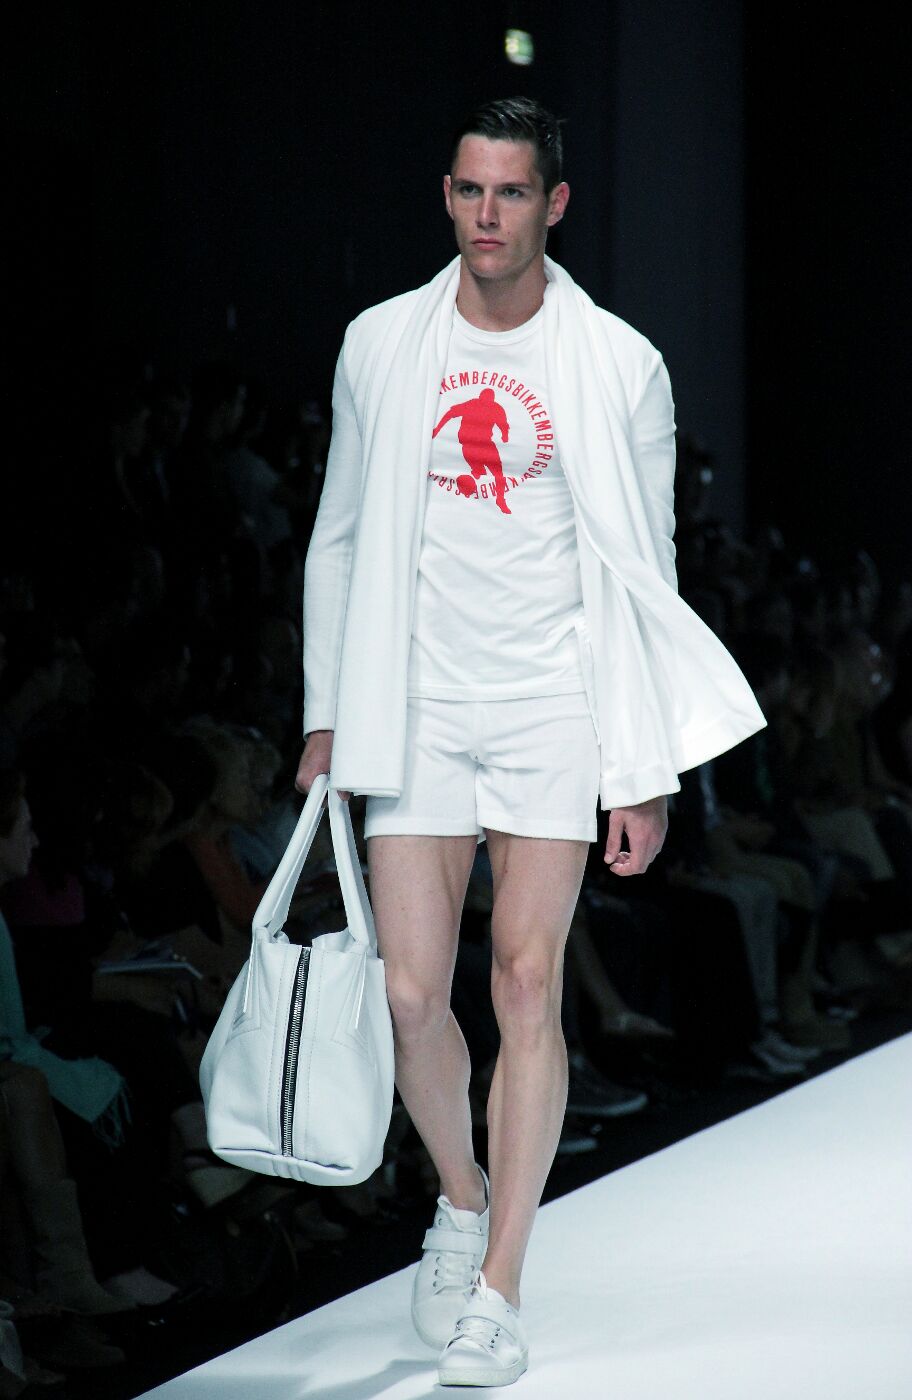 DIRK BIKKEMBERGS SPORT COUTURE SS 2012 | The Skinny Beep